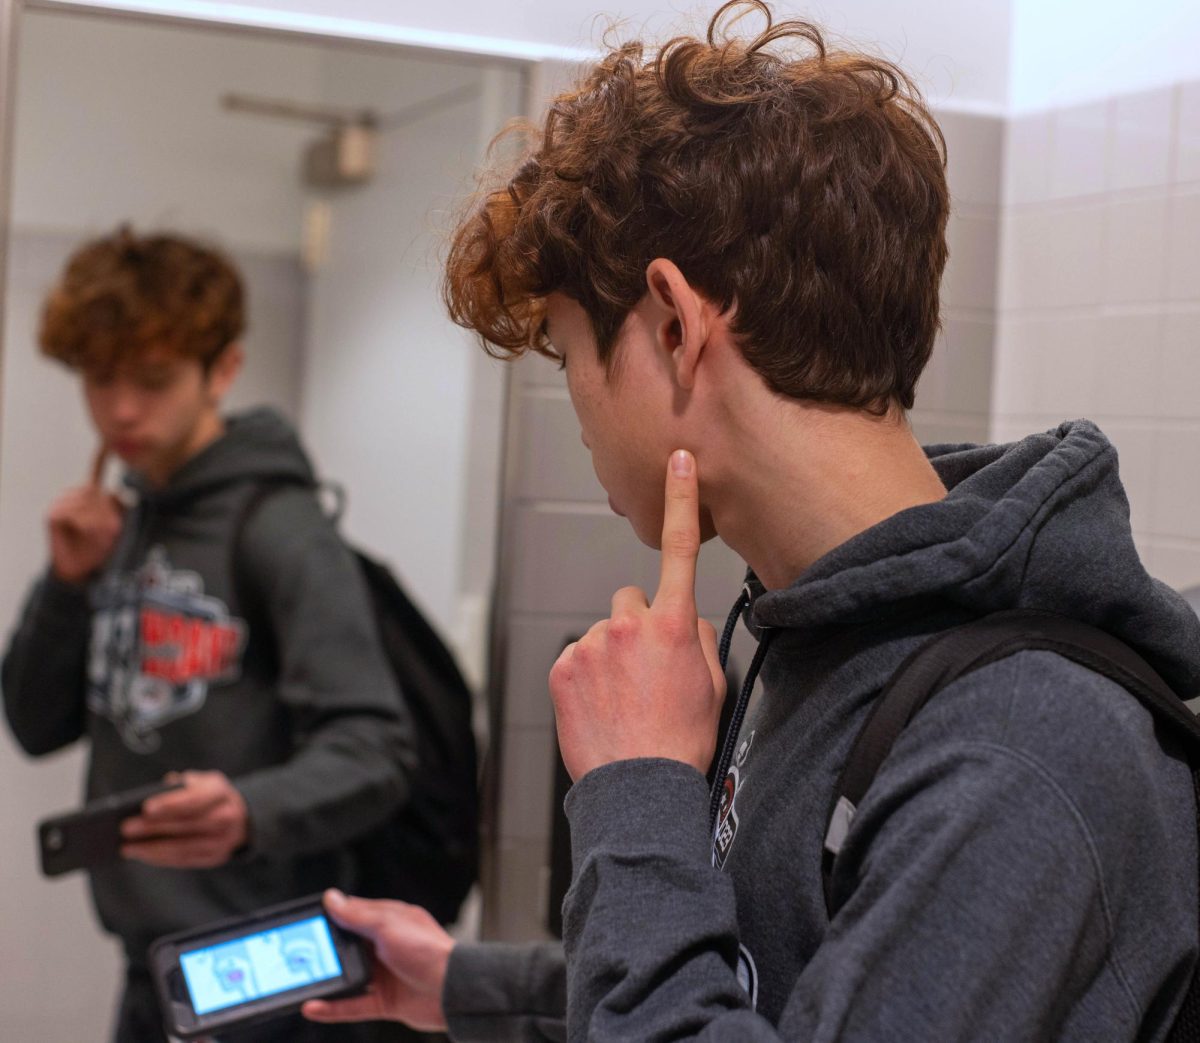 A student looks at his phone, following a  tutorial for a looksmaxxing method, mewing. Recently, looksmaxxing has risen in popularity on the internet and at U-High.